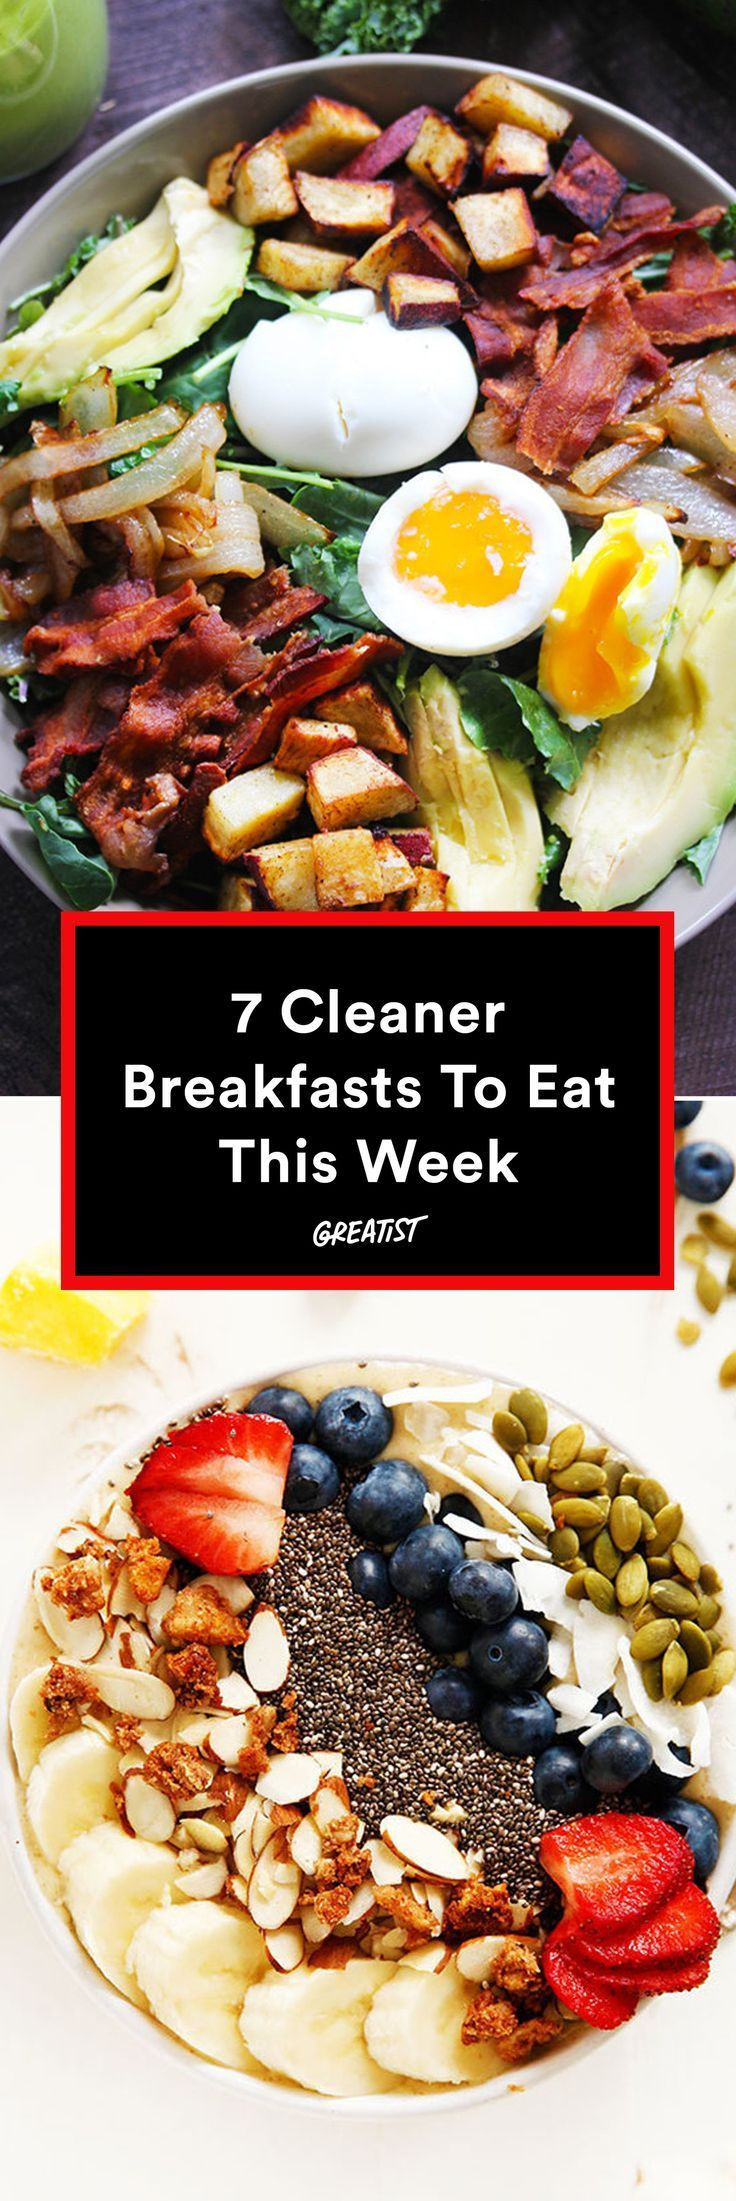 Clean Eating Recipes Breakfast
 7 Clean Breakfasts to Brighten Your Morning